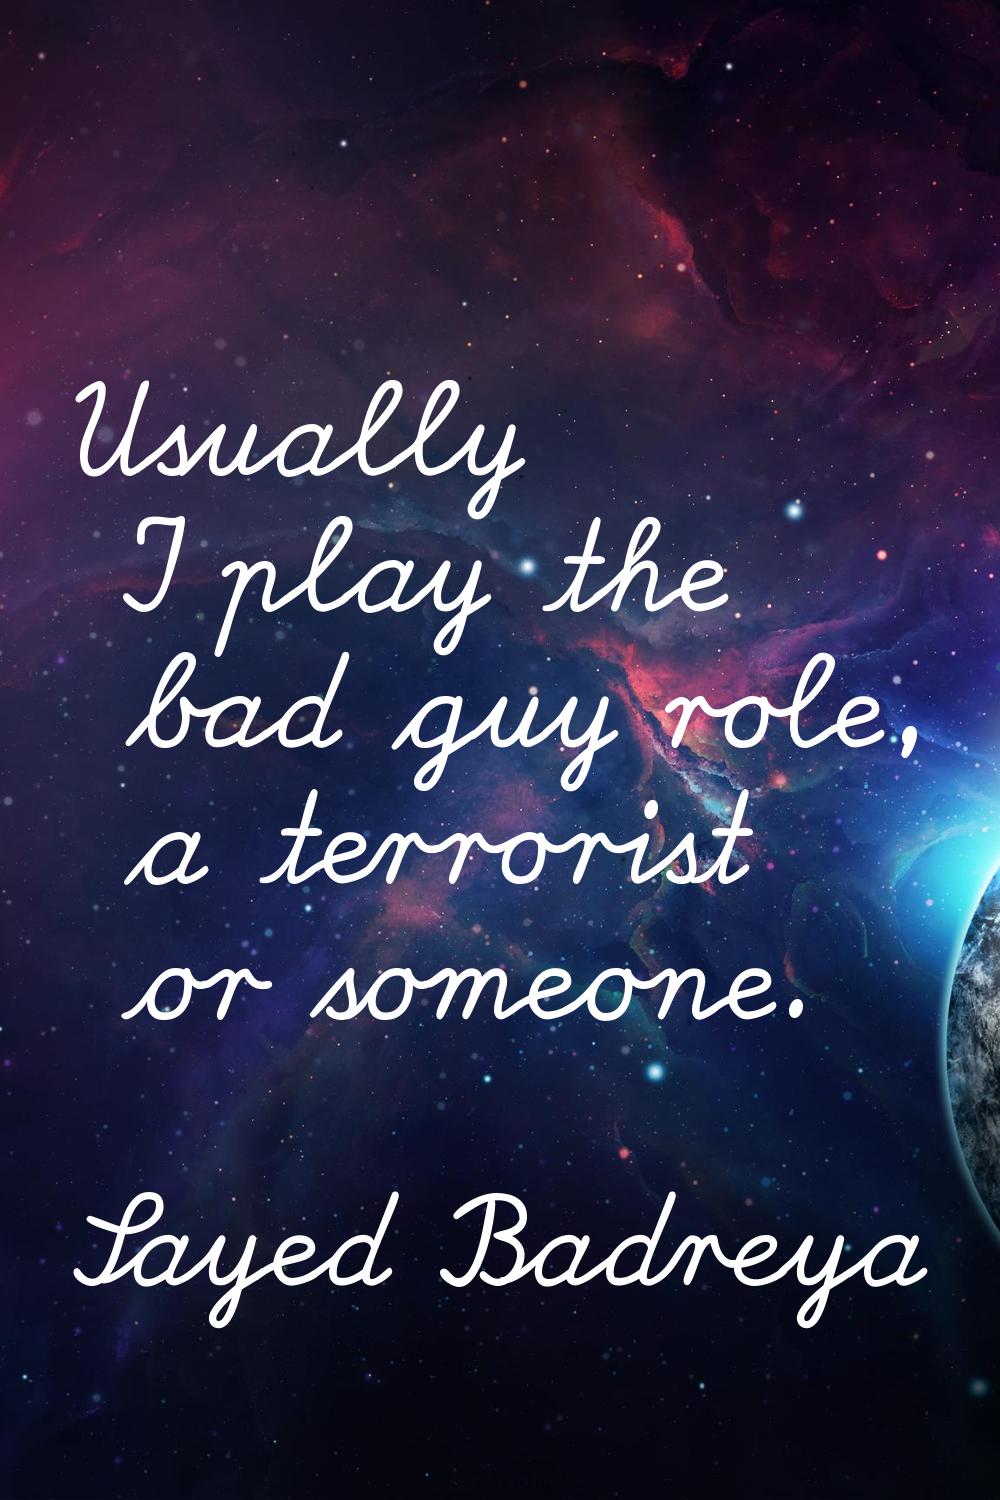 Usually I play the bad guy role, a terrorist or someone.